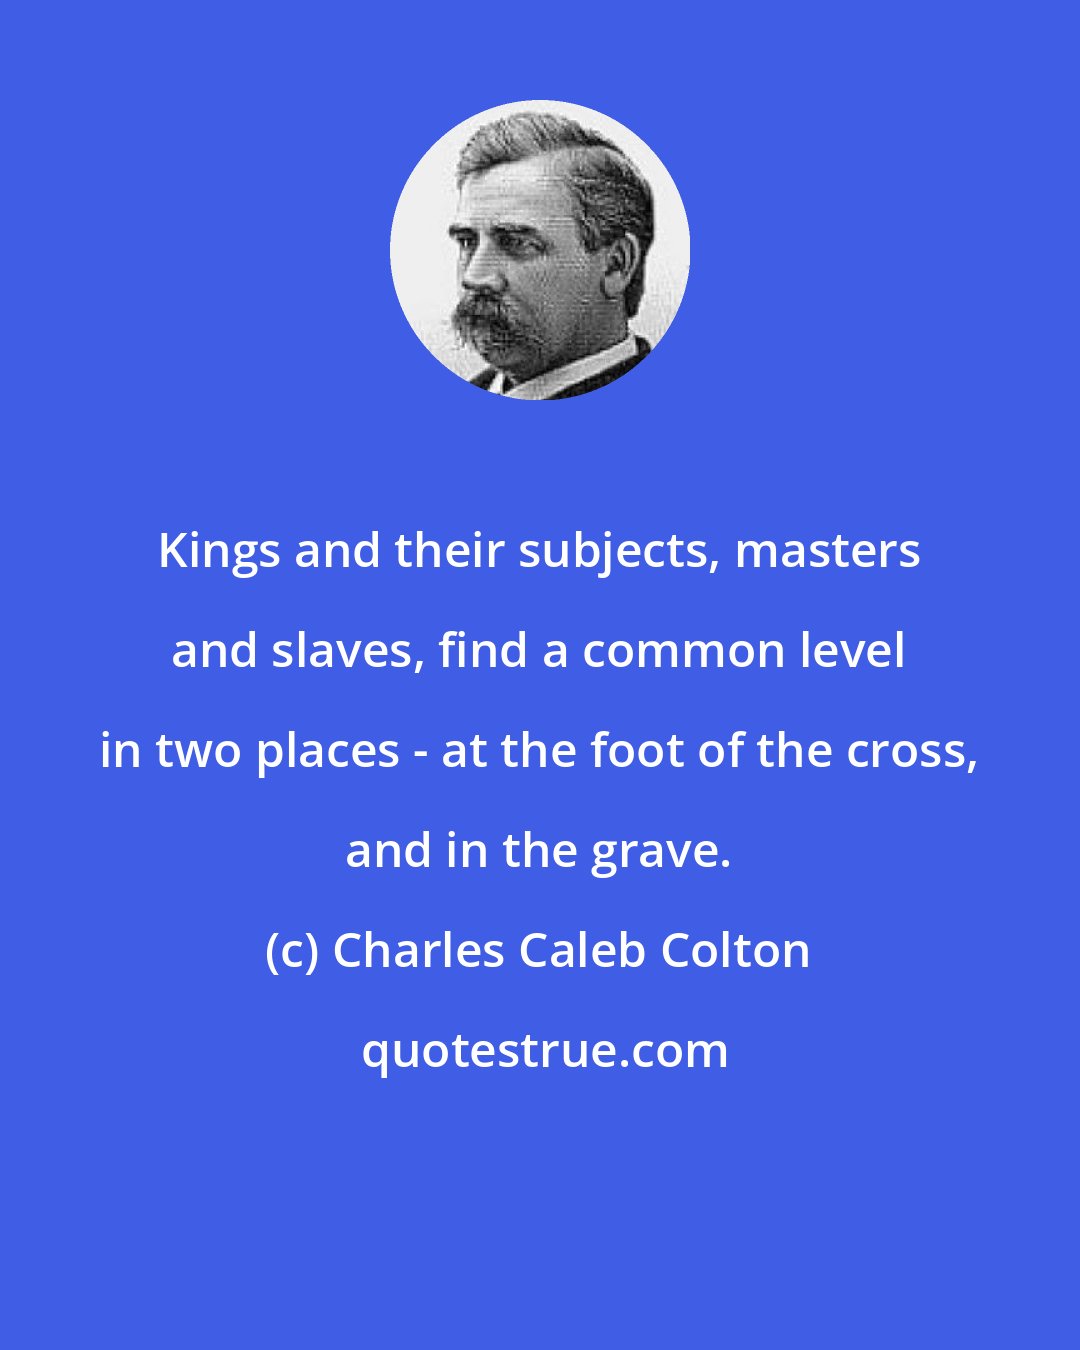 Charles Caleb Colton: Kings and their subjects, masters and slaves, find a common level in two places - at the foot of the cross, and in the grave.